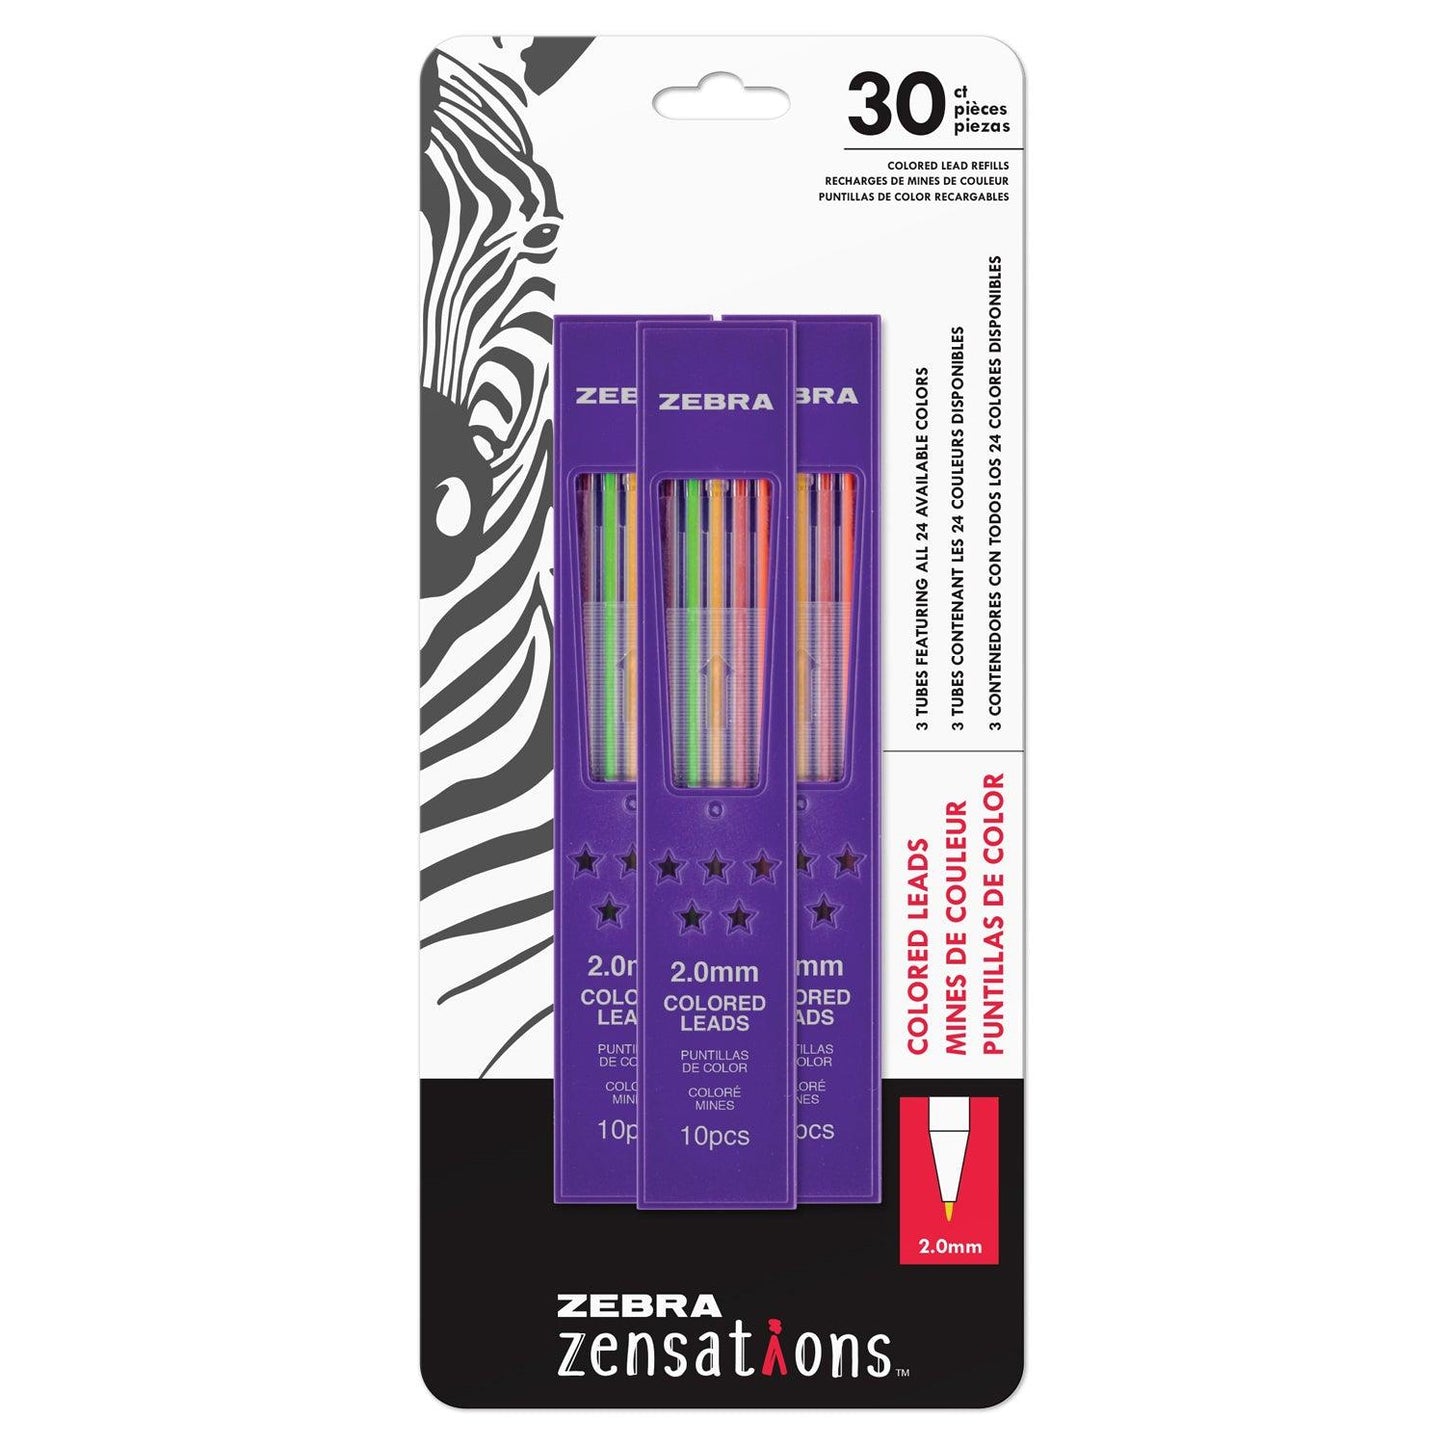 Mechanical Colored Pencil Lead Refill, 2.0mm Point Size, Assorted Colored Lead, 30 Per Pack, 3 Packs - Loomini